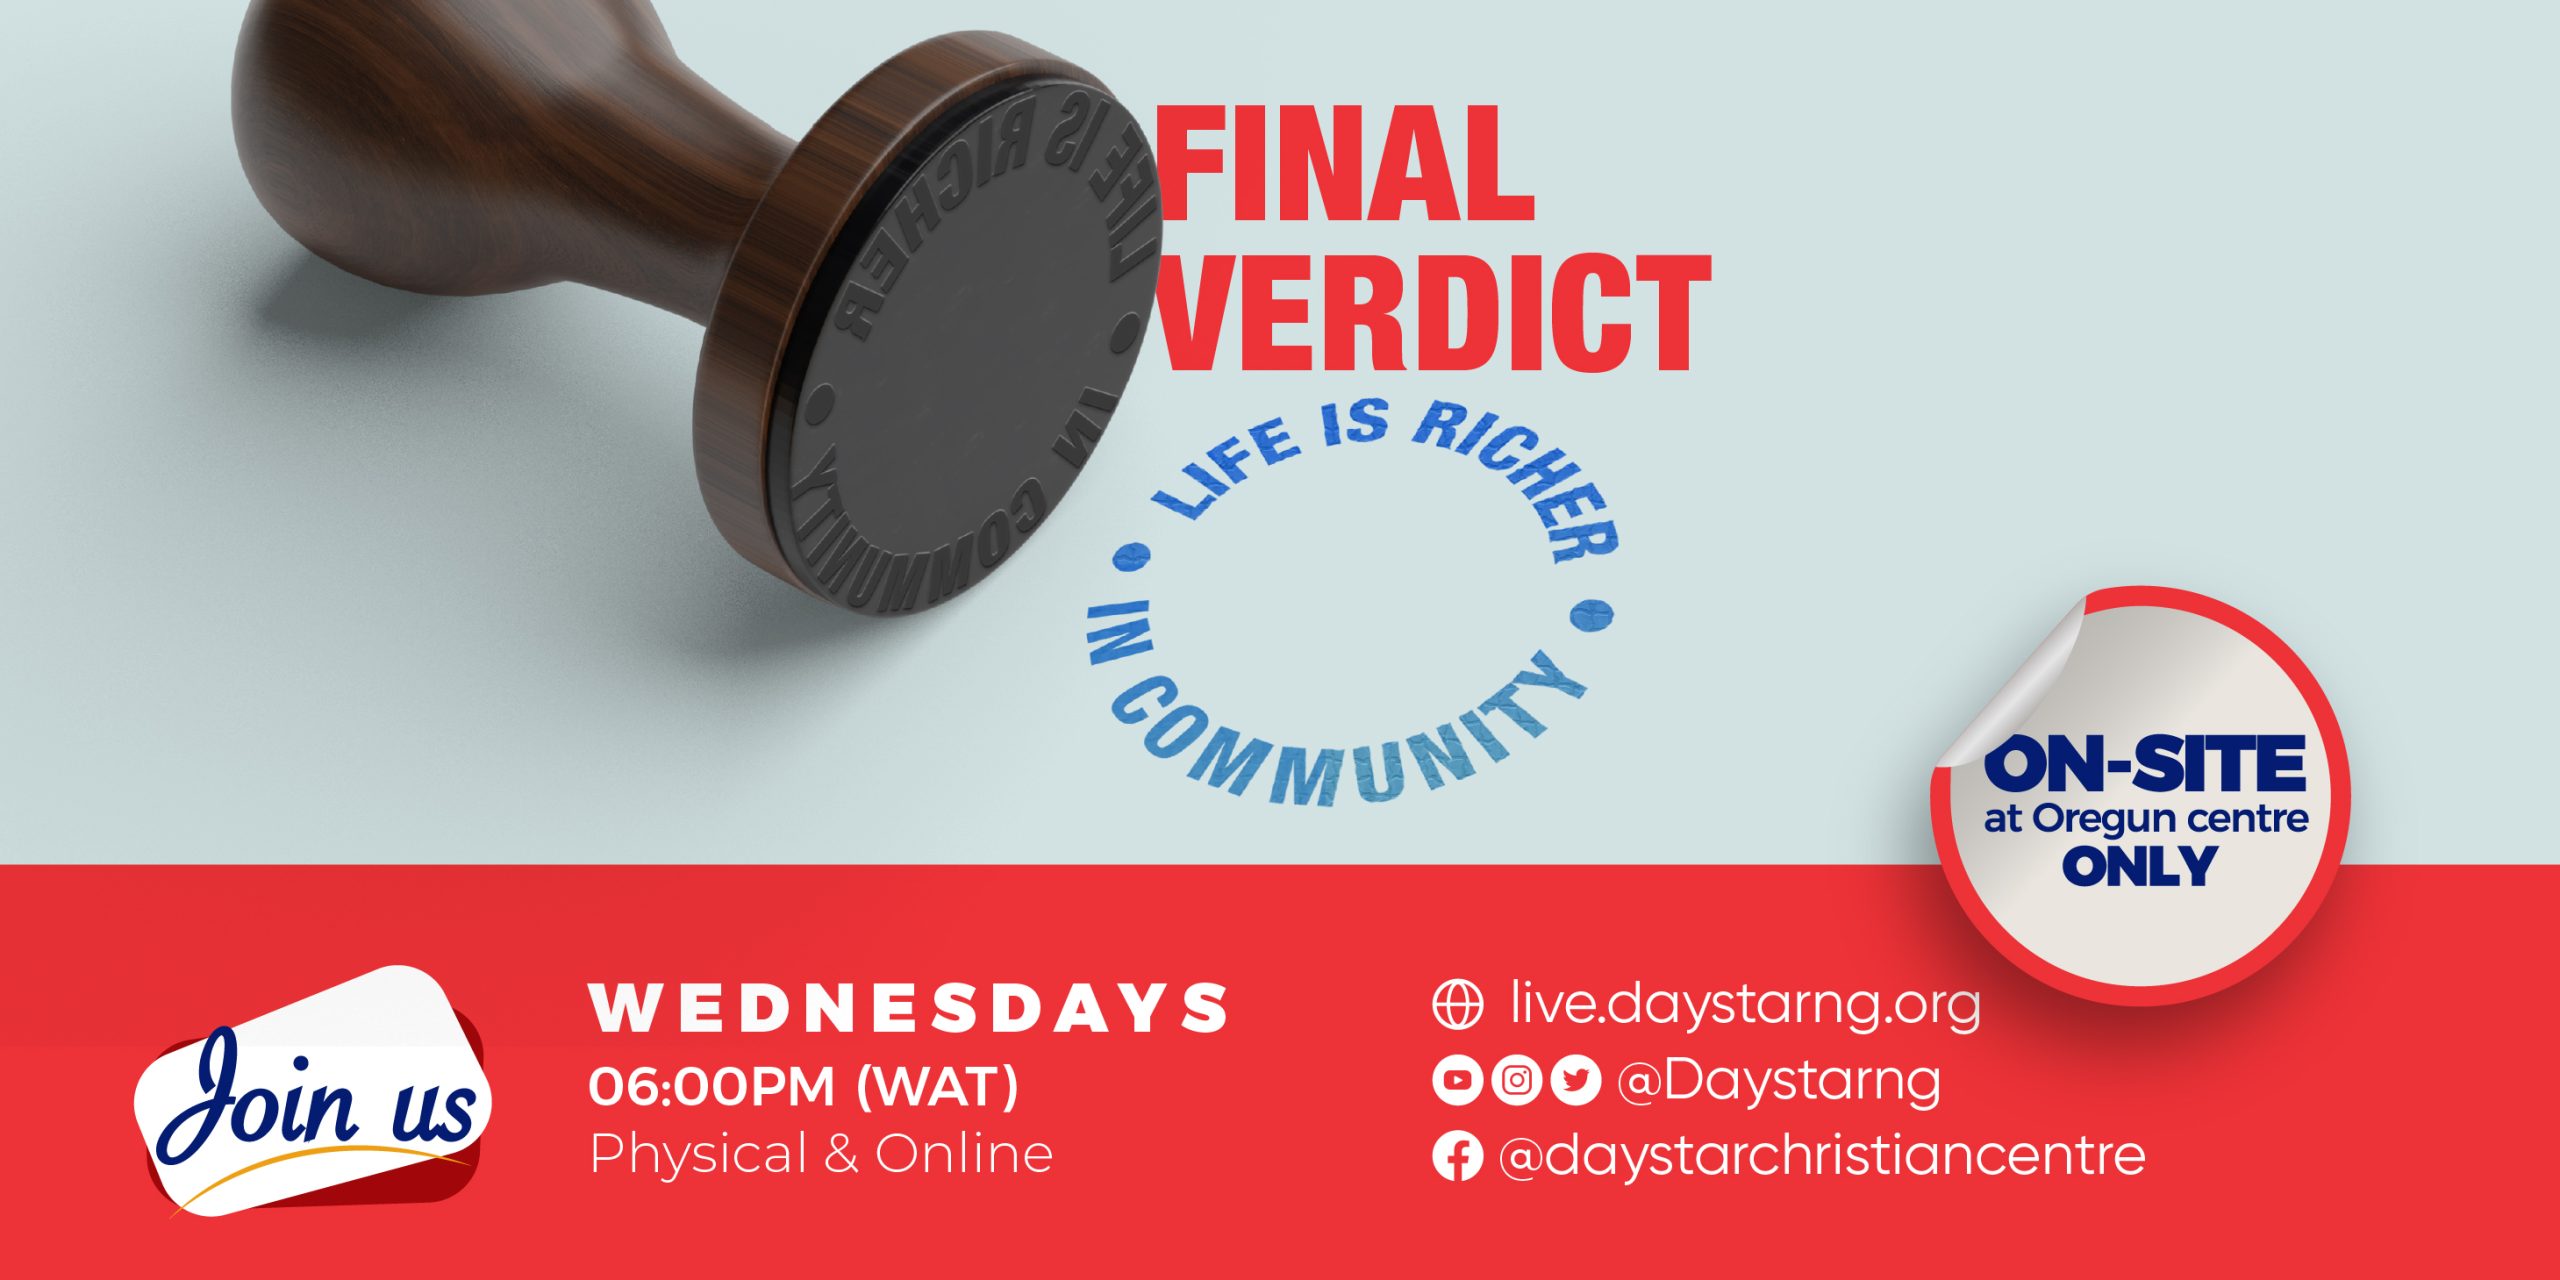 The Final Verdict Is IN! | Daystar Christian Centre